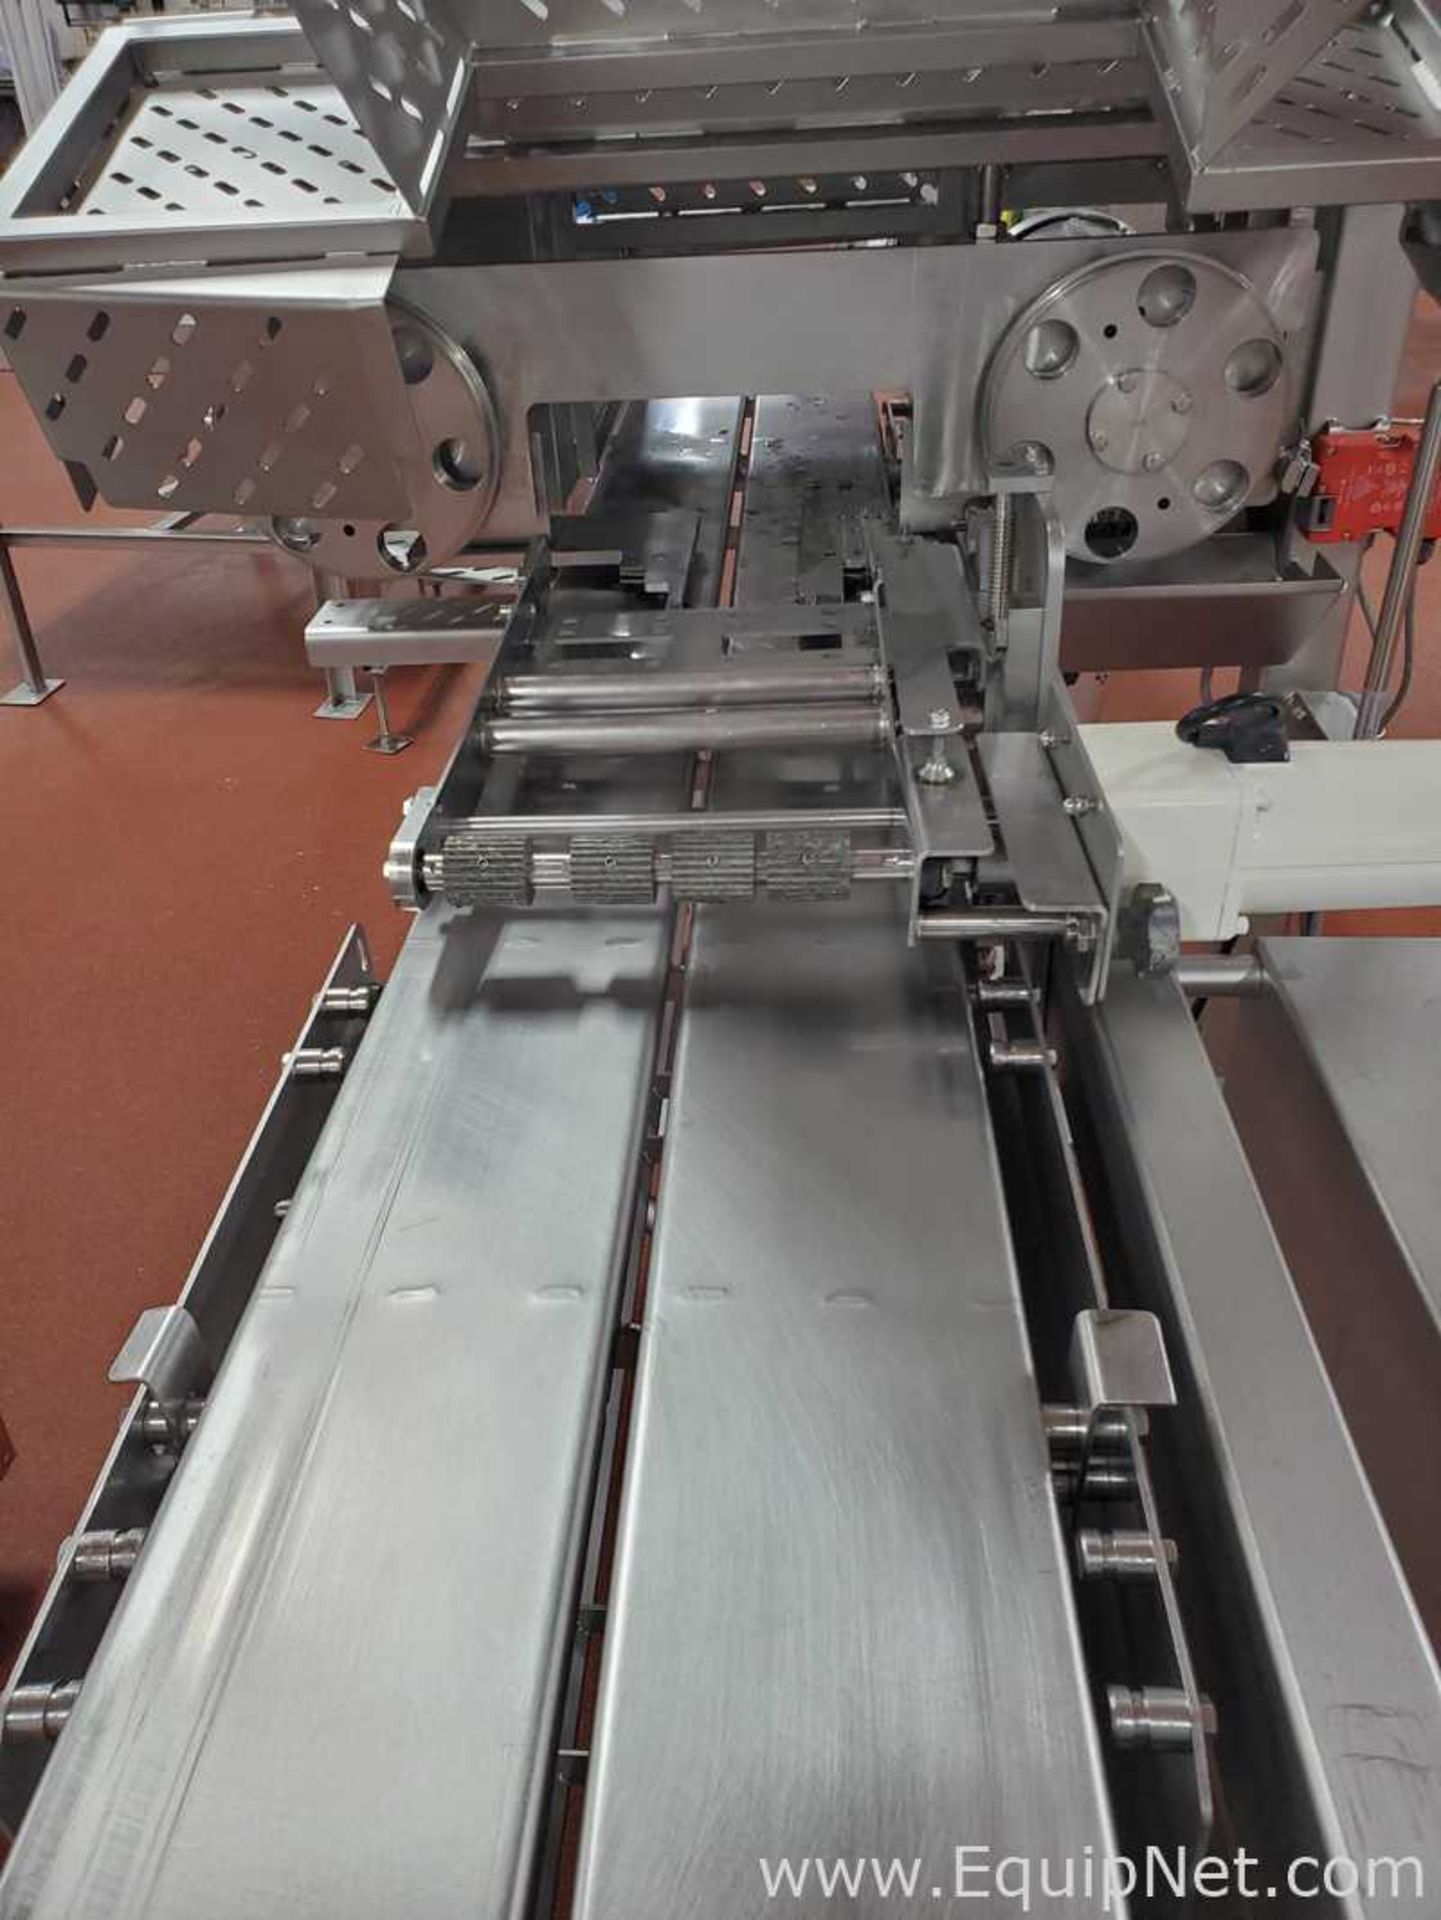 Grote HBC Horizontal Bread Cutter - Image 5 of 21